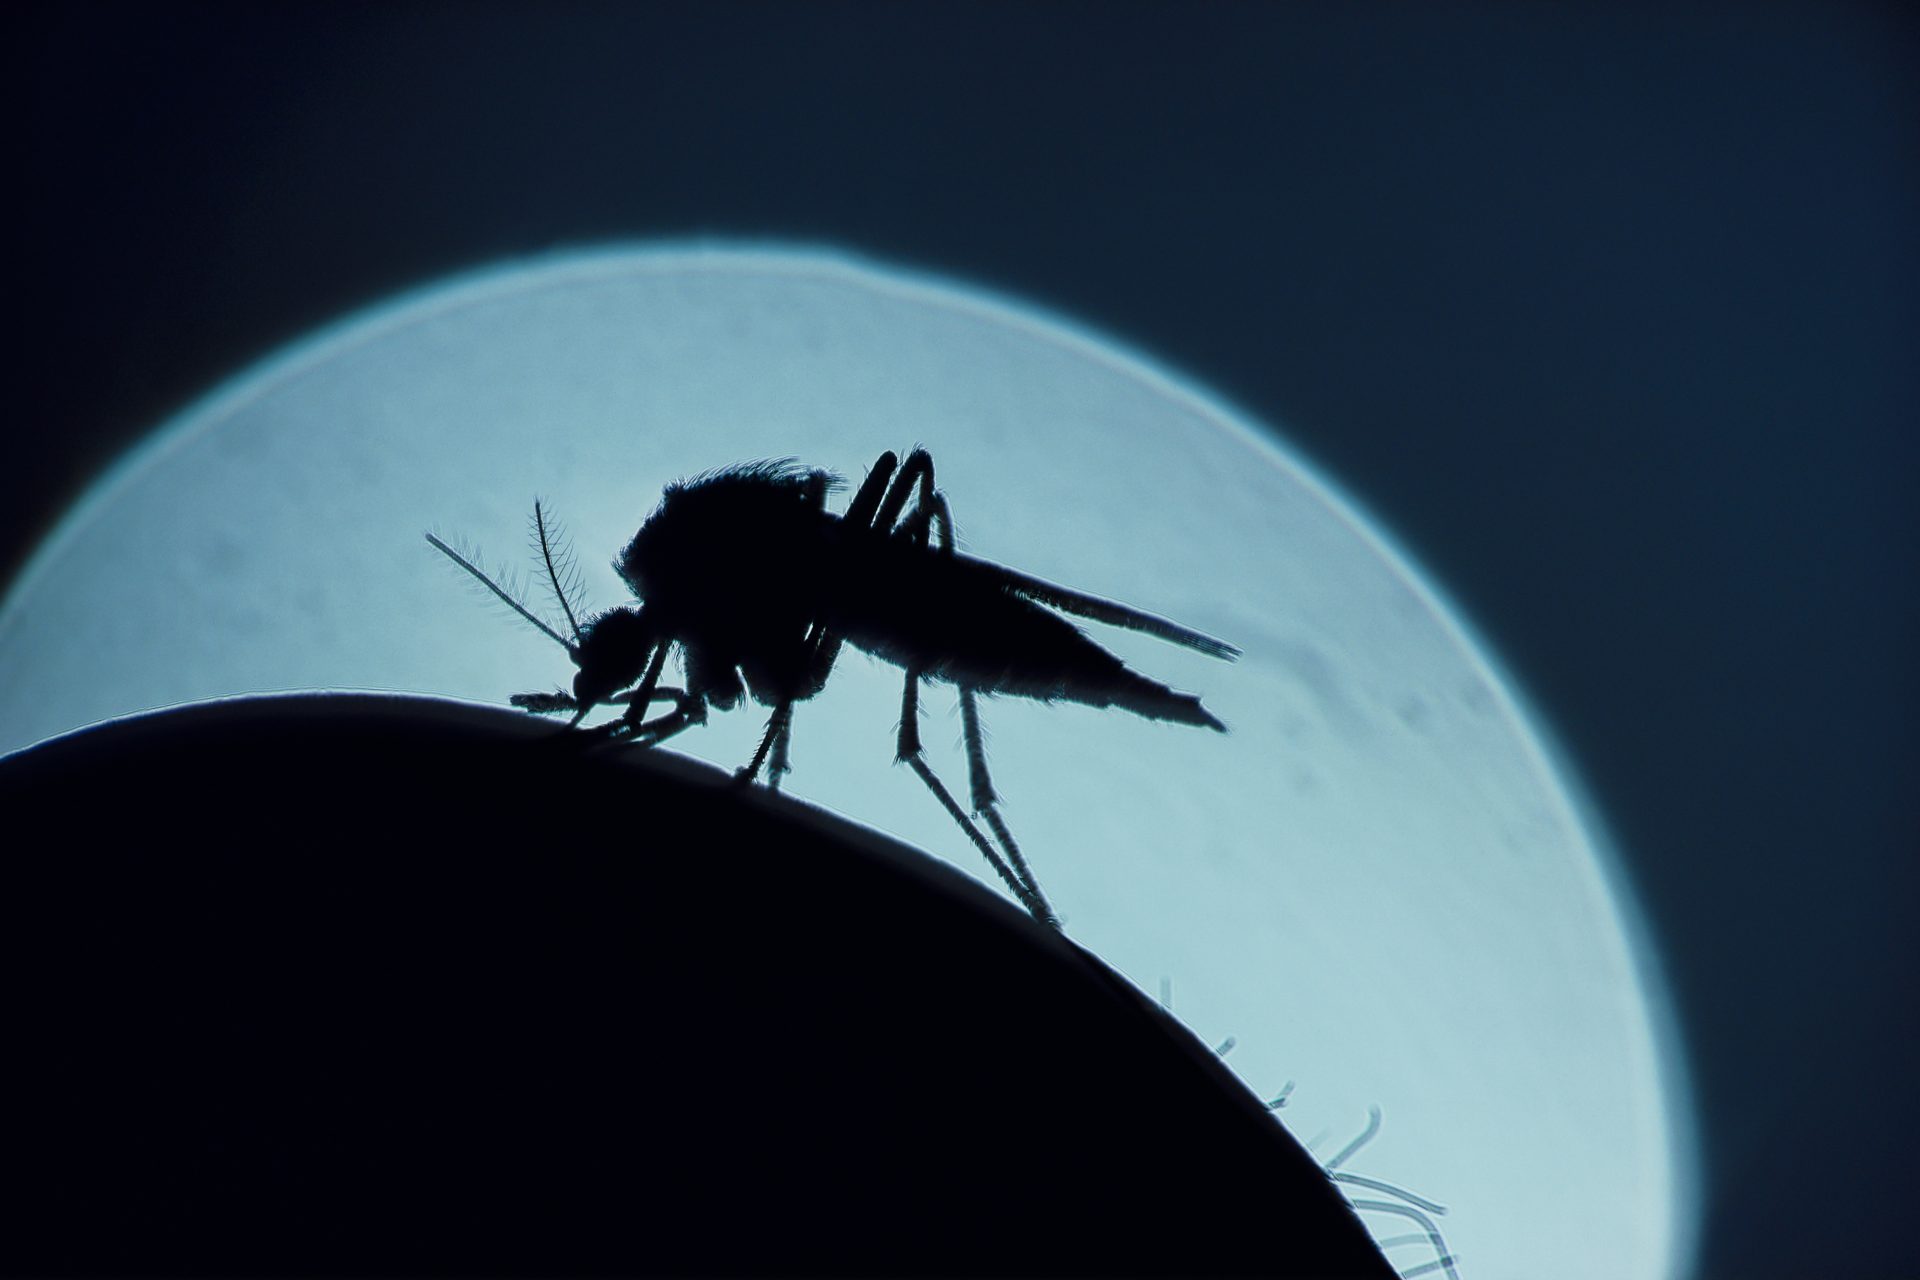 The mRNA tech we outdated against COVID could perhaps well abet us at last beat malaria